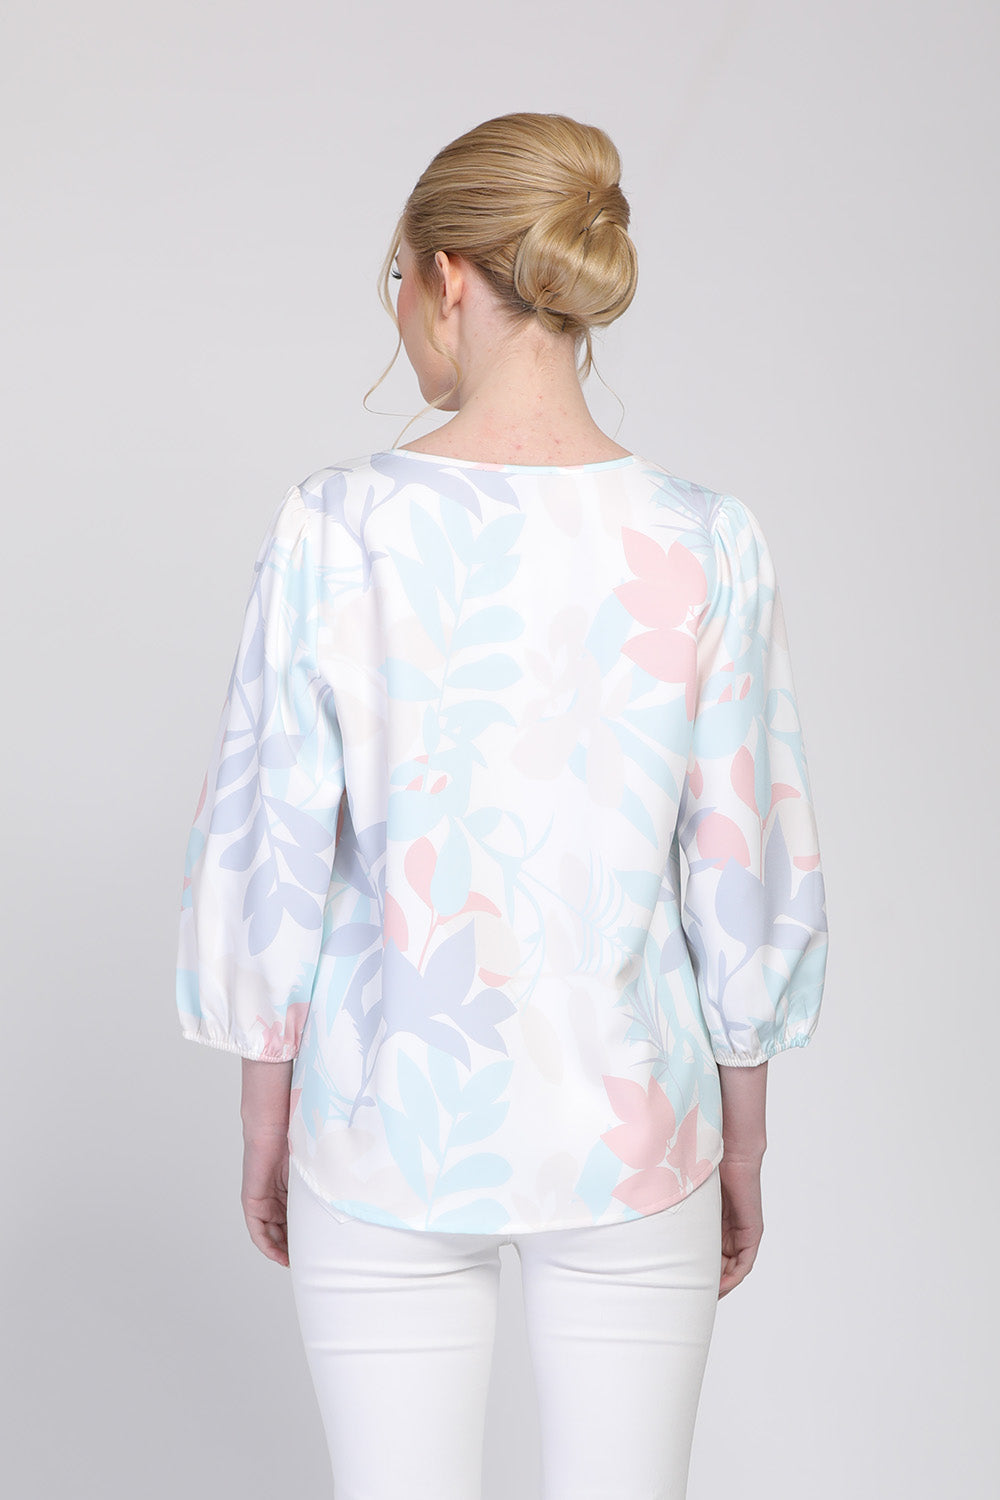 JULY Abstract Floral Prints Blouse